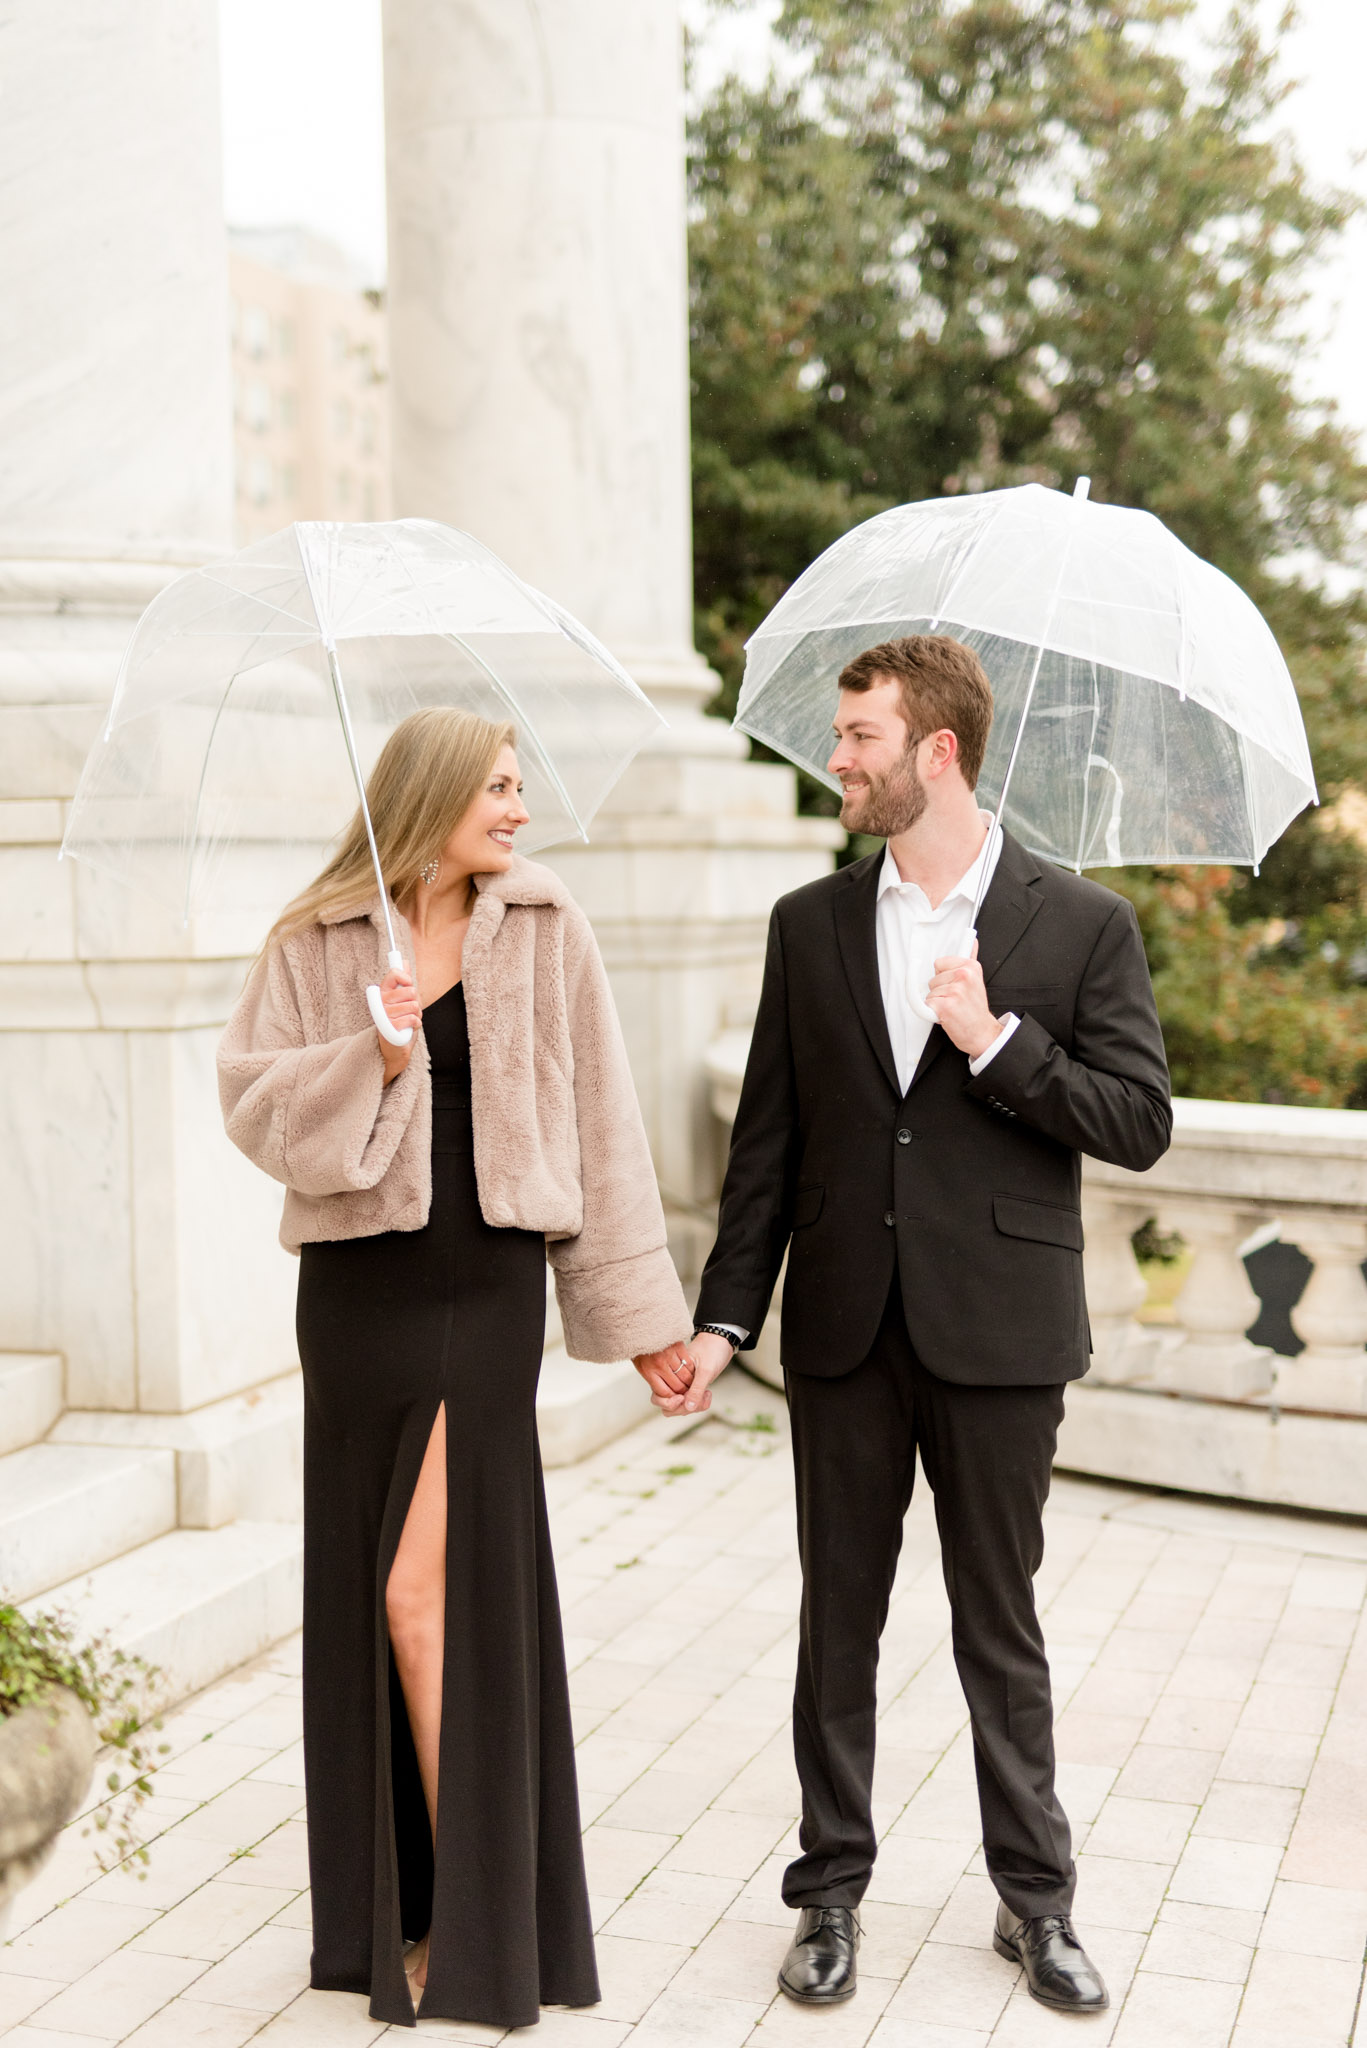 Couple hold hands and umbrellas.